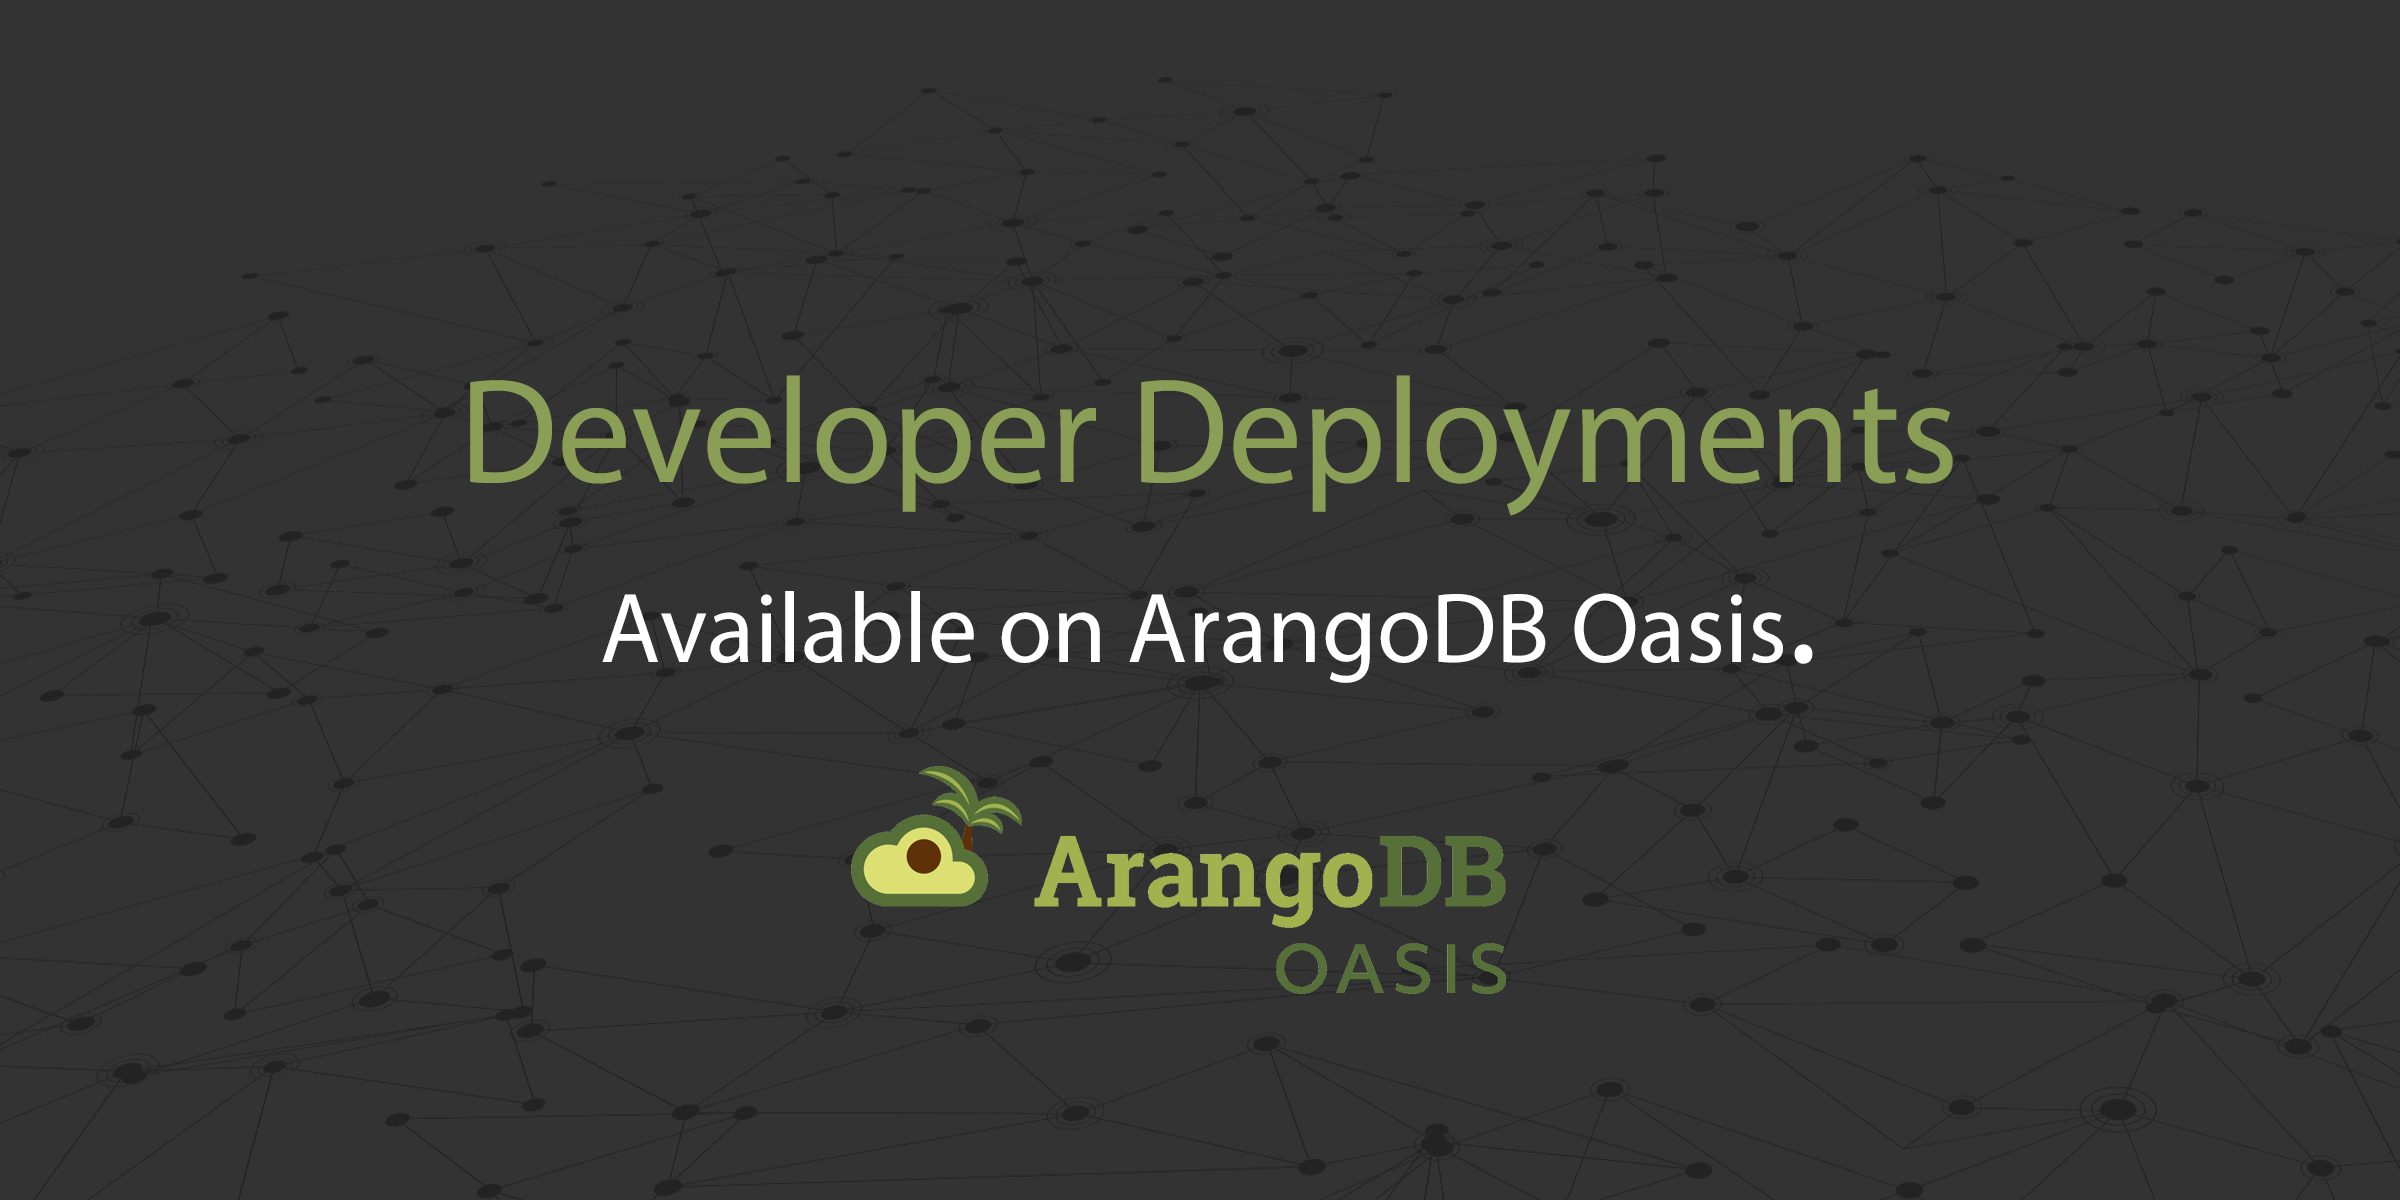 In this blog post, we’ll tell you what Developer deployments are, what you can do with them, what you should not do with them, and how to get starte